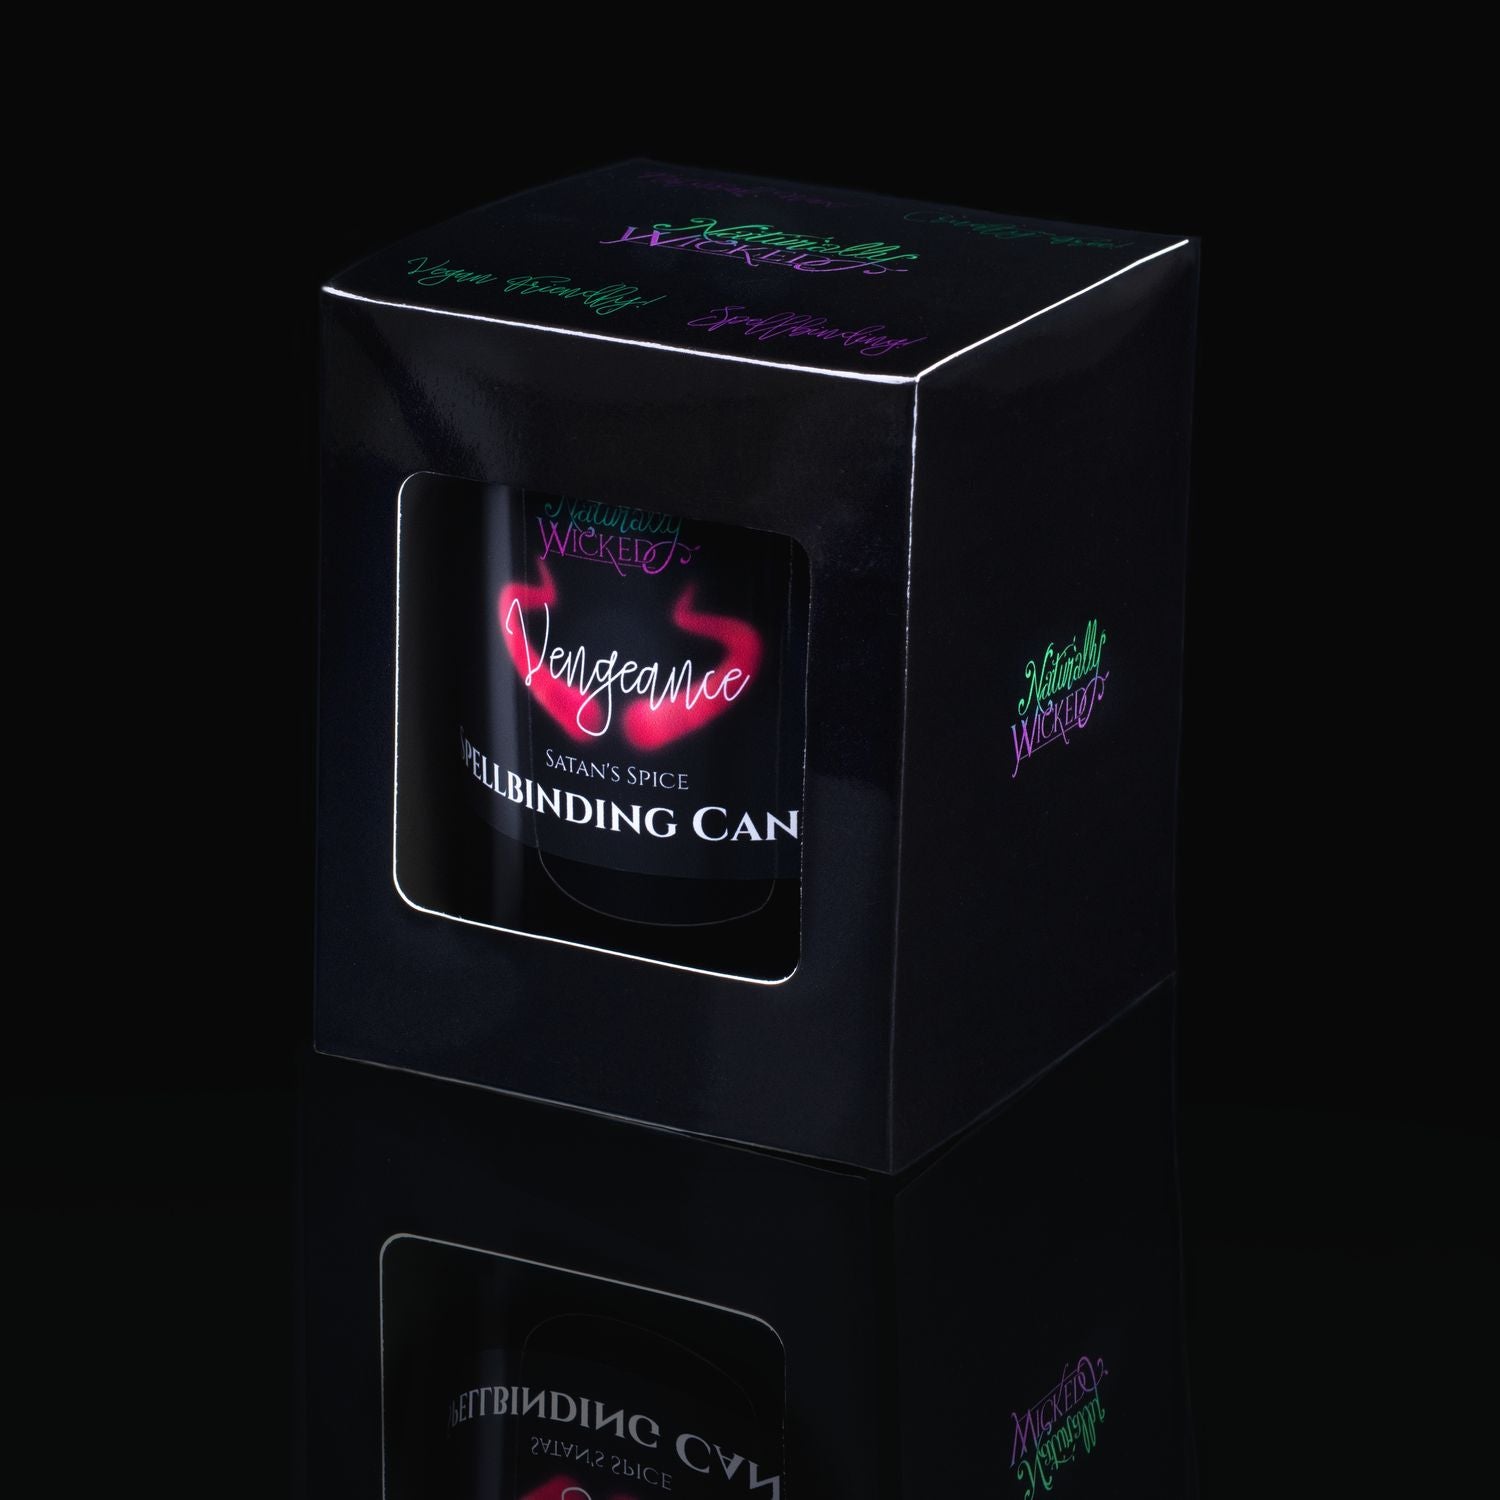 The Perfect Spell Candle For The Darkest Of Souls. Naturally Wicked Spellbinding Vengeance Candle Displayed In A Sleek Black Gloss Gift Box. The Candle Features Plant-Based Smooth Rich Red Wax, A Wood Wick And A Beautiful Carnelian Crystal.